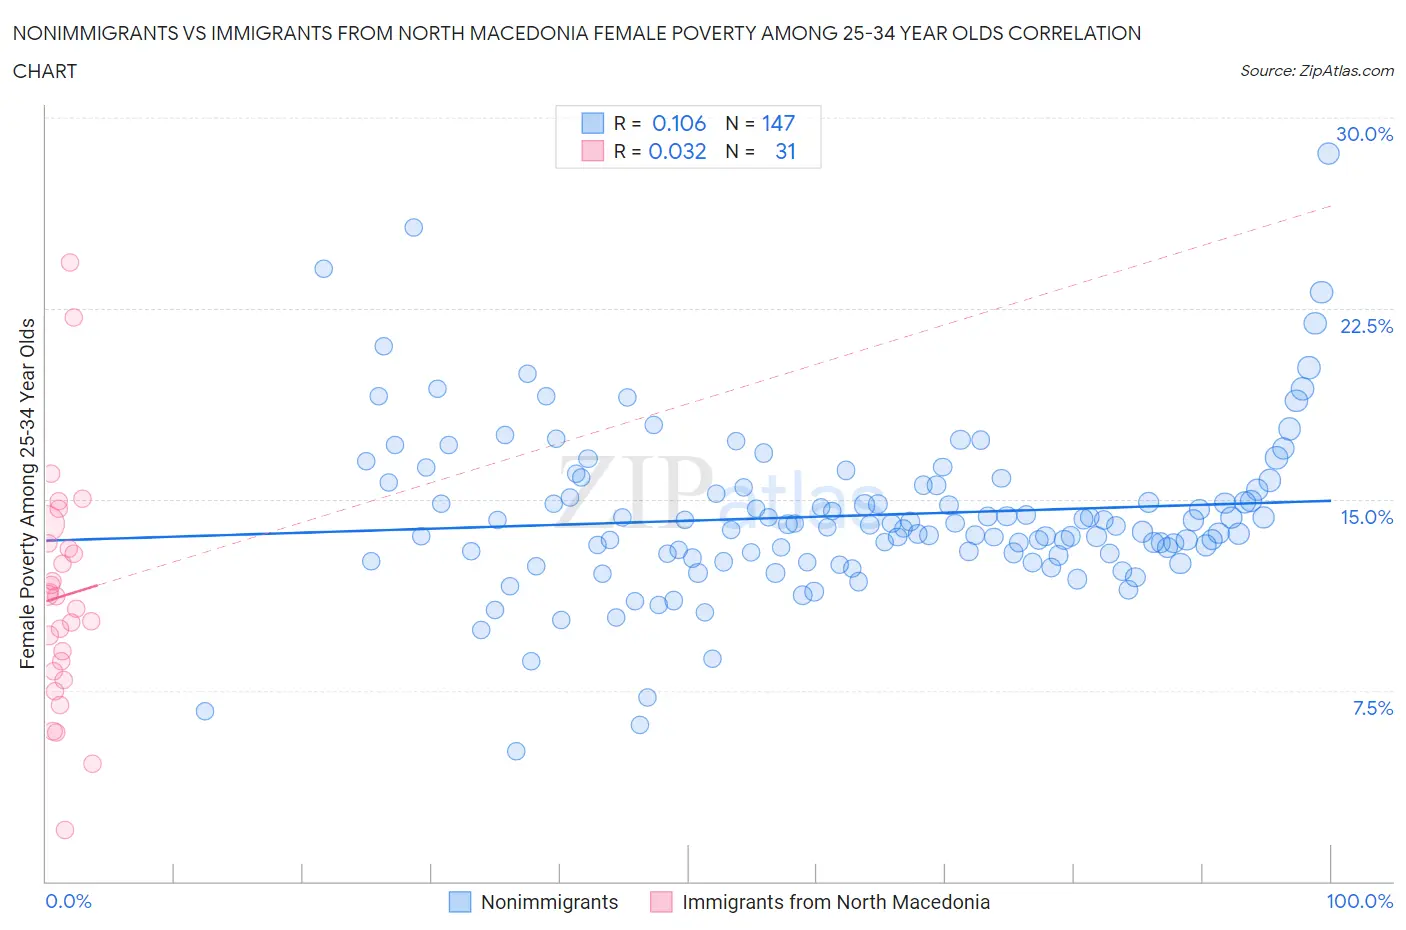 Nonimmigrants vs Immigrants from North Macedonia Female Poverty Among 25-34 Year Olds